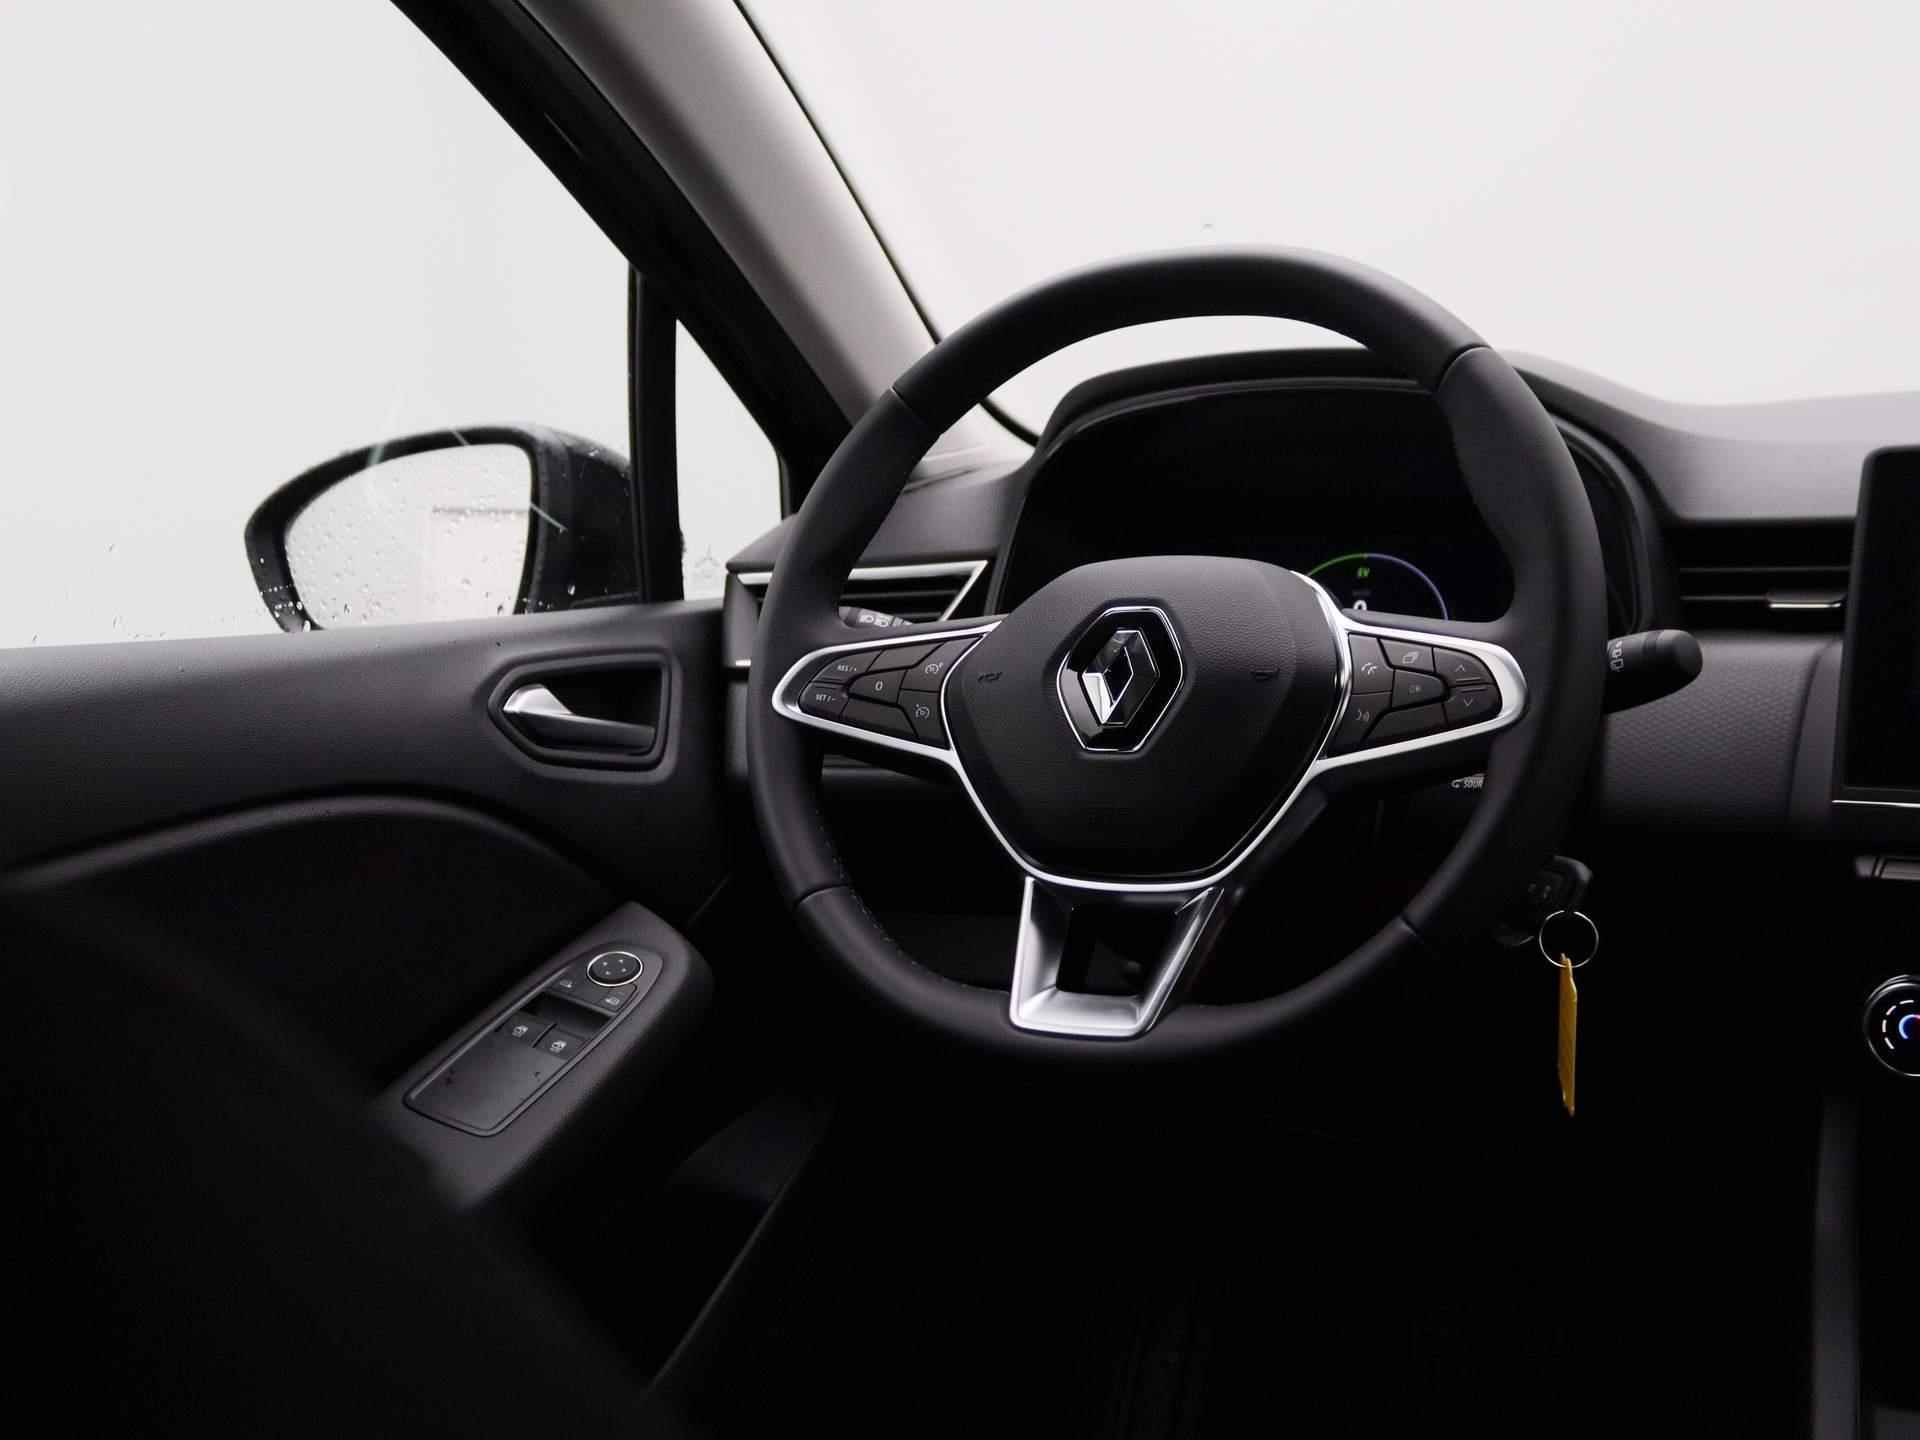 Renault Clio 1.6 E-Tech Full Hybrid 145 Equilibre | PDC Achter | Airconditioning | Draadloze Apple Carplay & Android Auto | Cruise Control | Licht- en regensensor - 11/36